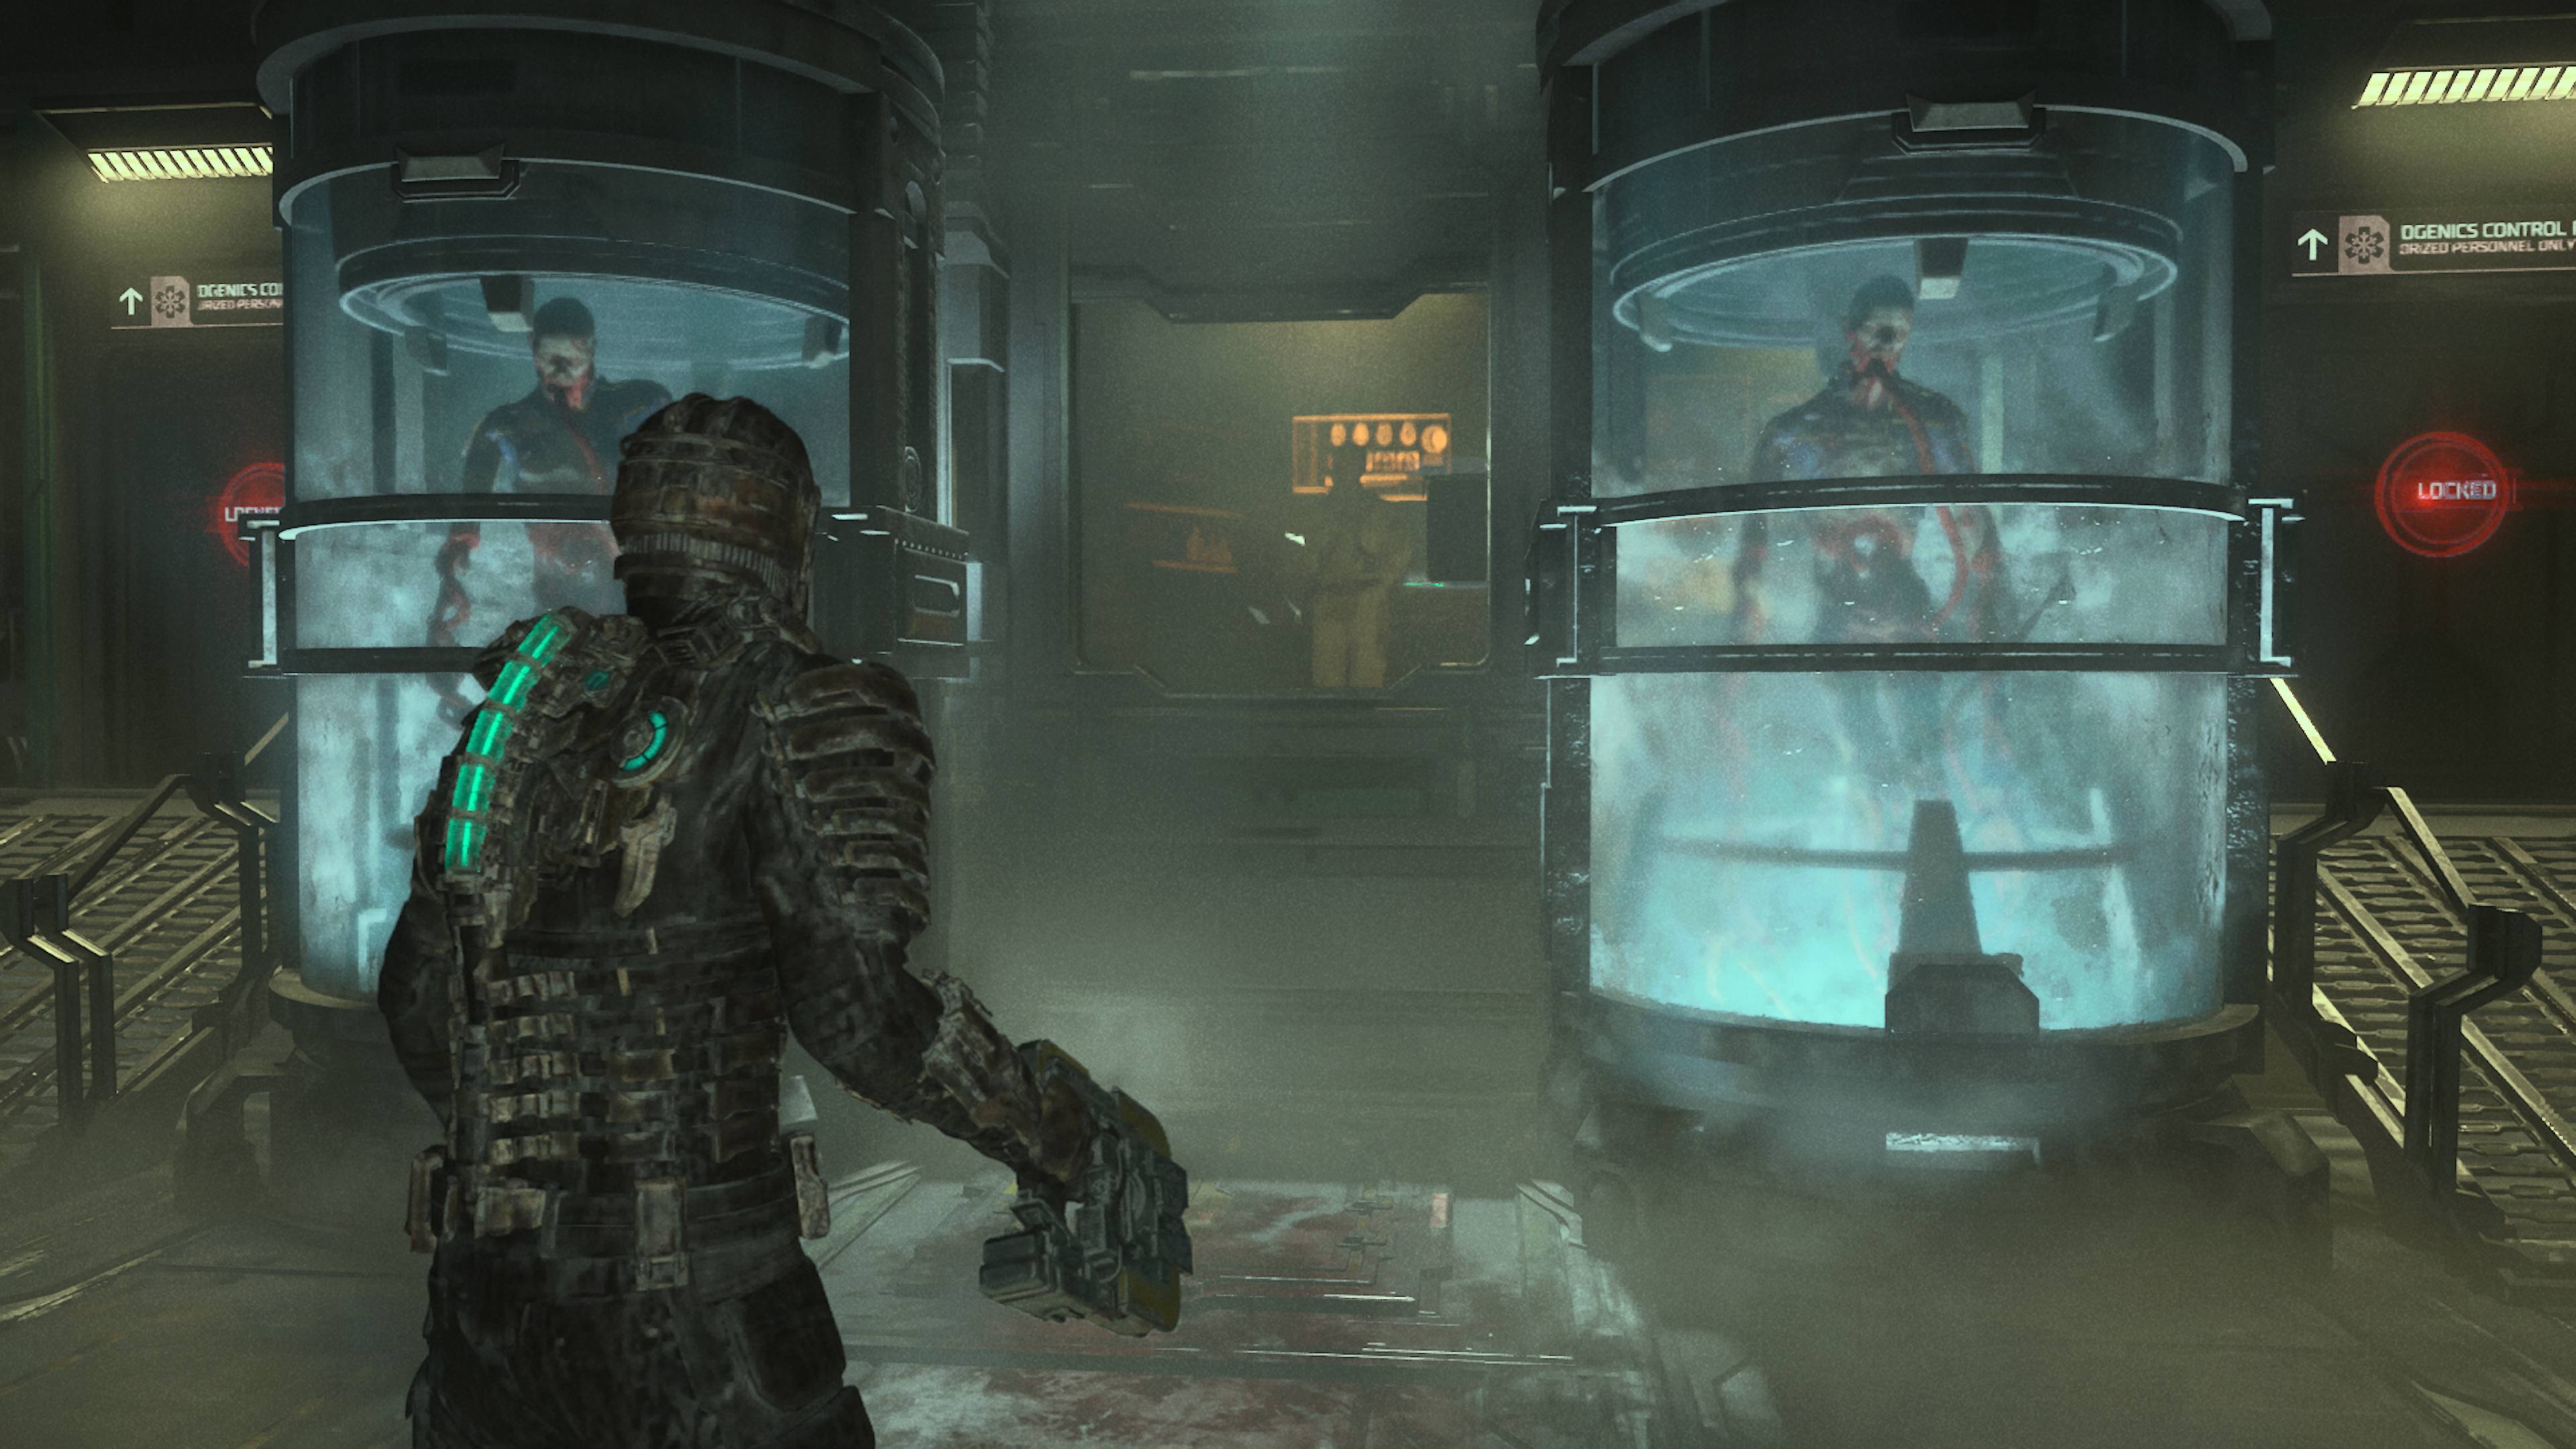 Prime Gaming Reveals May 2022 Offerings including Dead Space 2